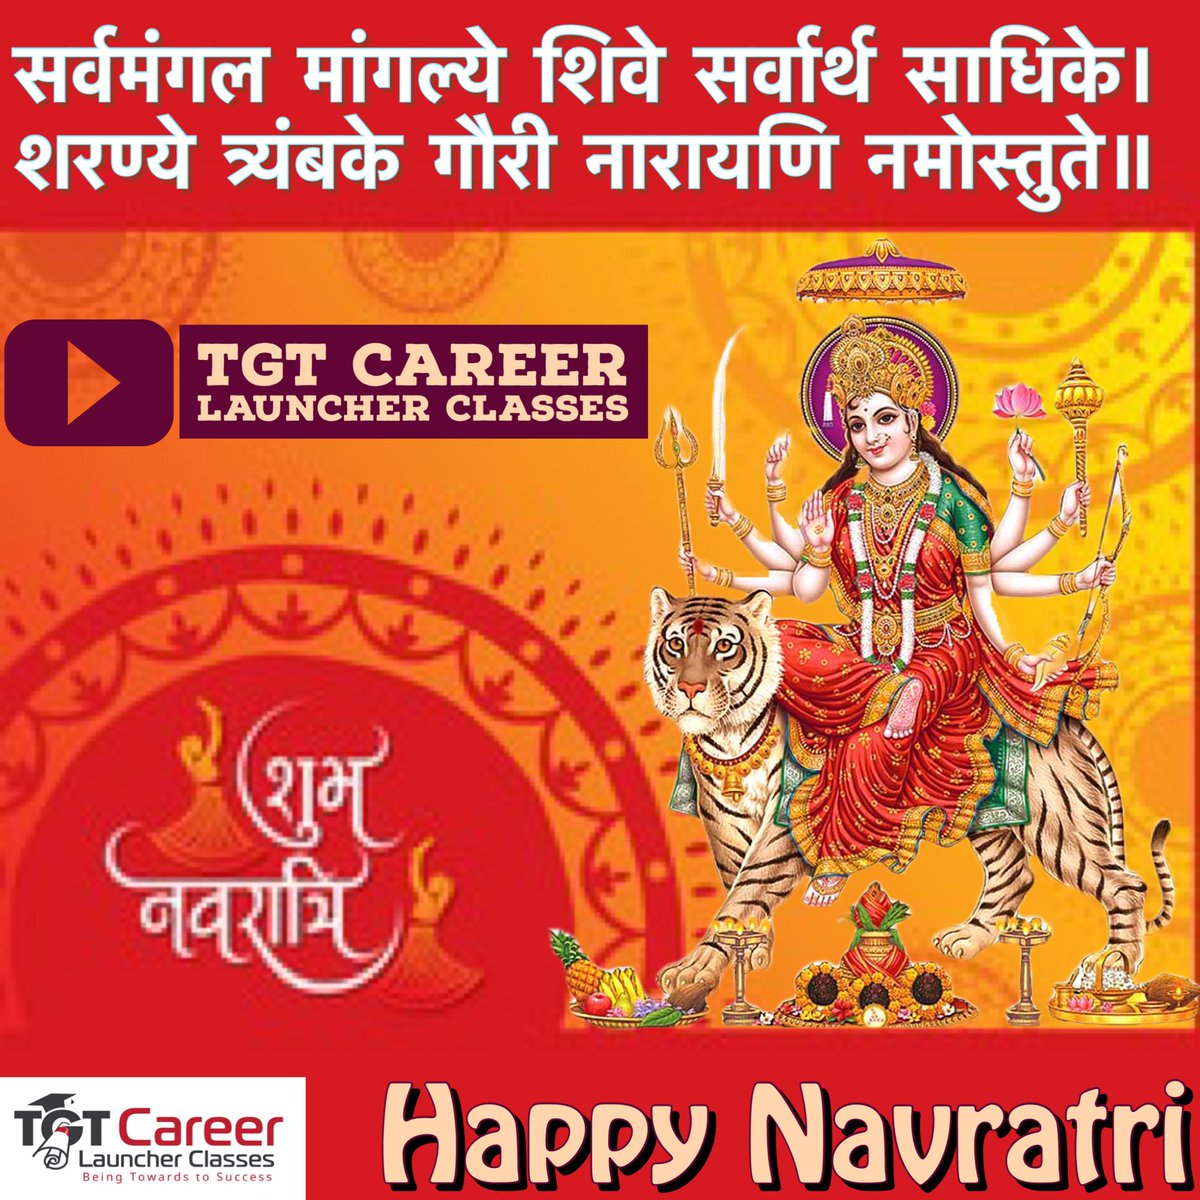 May Maa Durga bless you and your family with her divine grace this Navratri! May this Navratri fill your heart with love, your mind with peace, and your life with prosperity.
#happynavratri #navratri #navratri2018 #navratrispecial #himmithakur #tgtcareerlauncherclasses